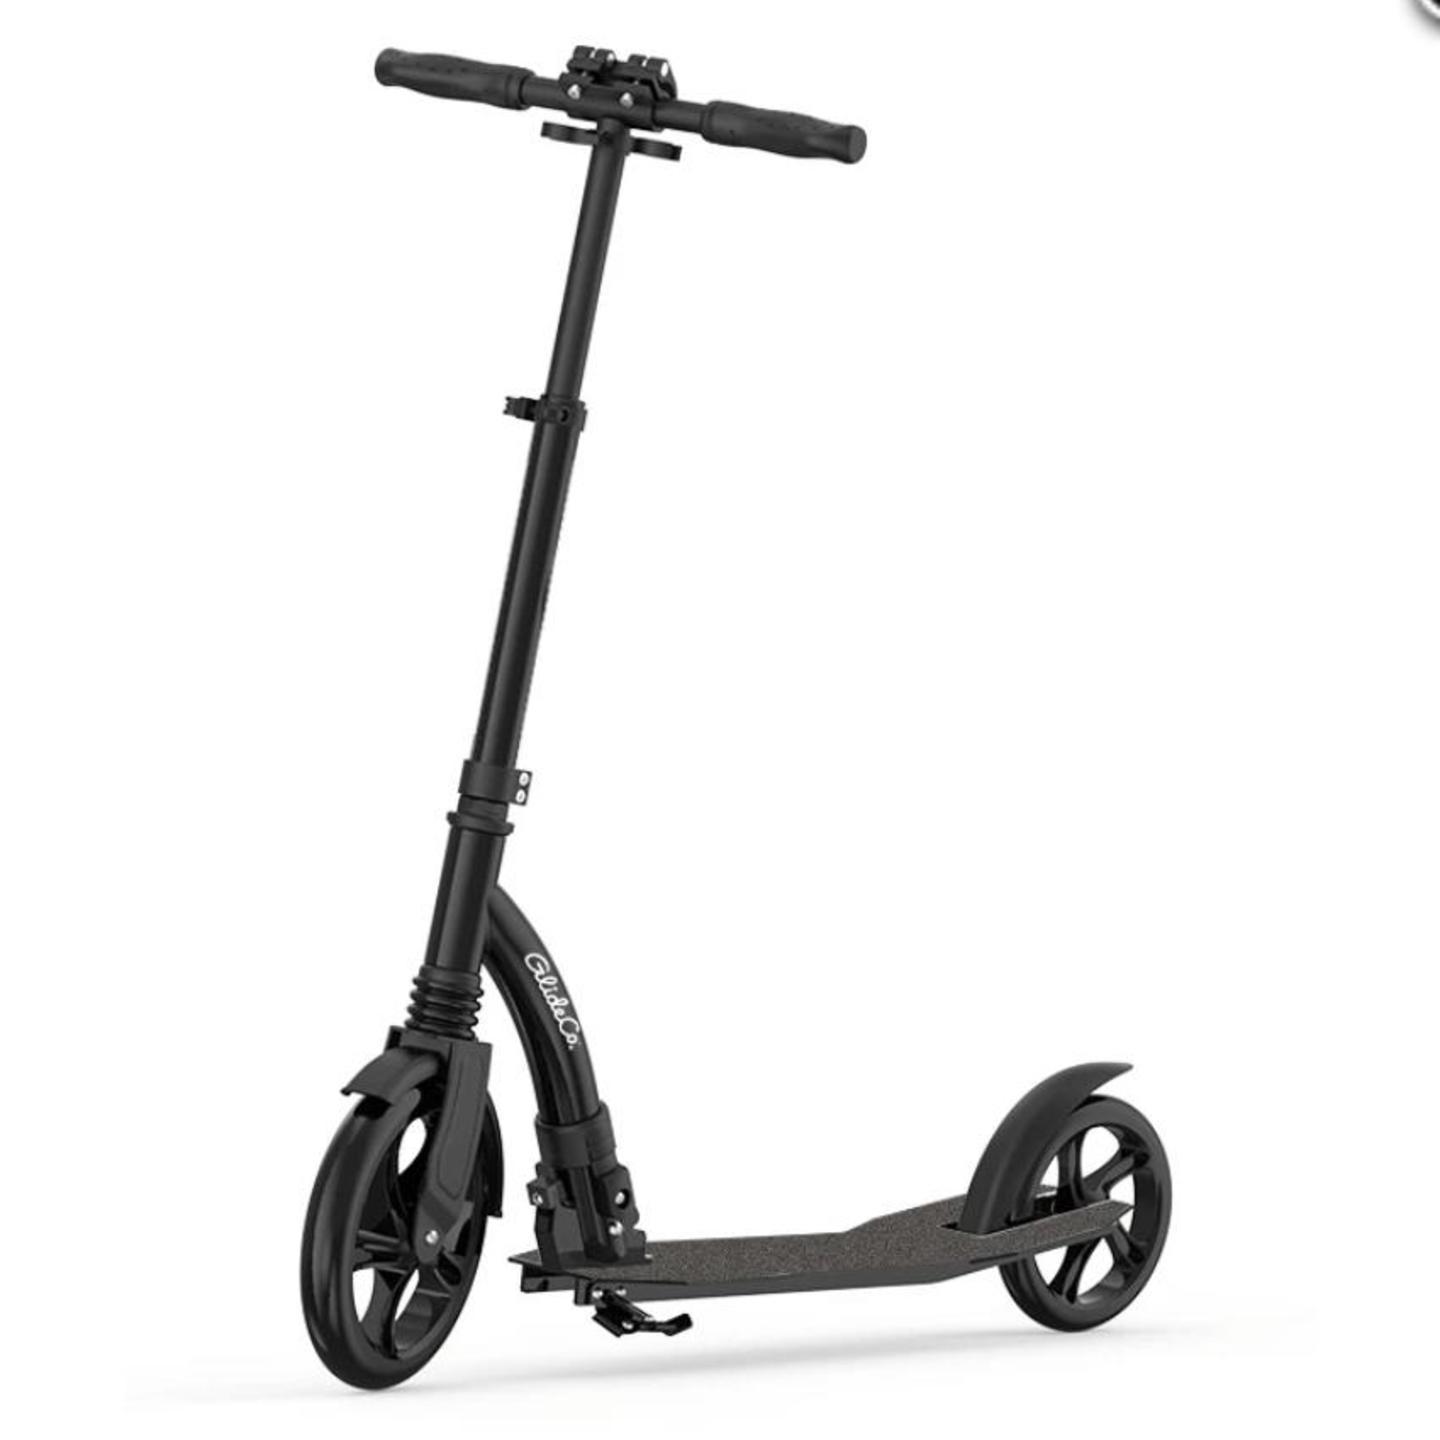 Glideco GrandTourer Kick Scooter with 230mm Wheel and Front suspension